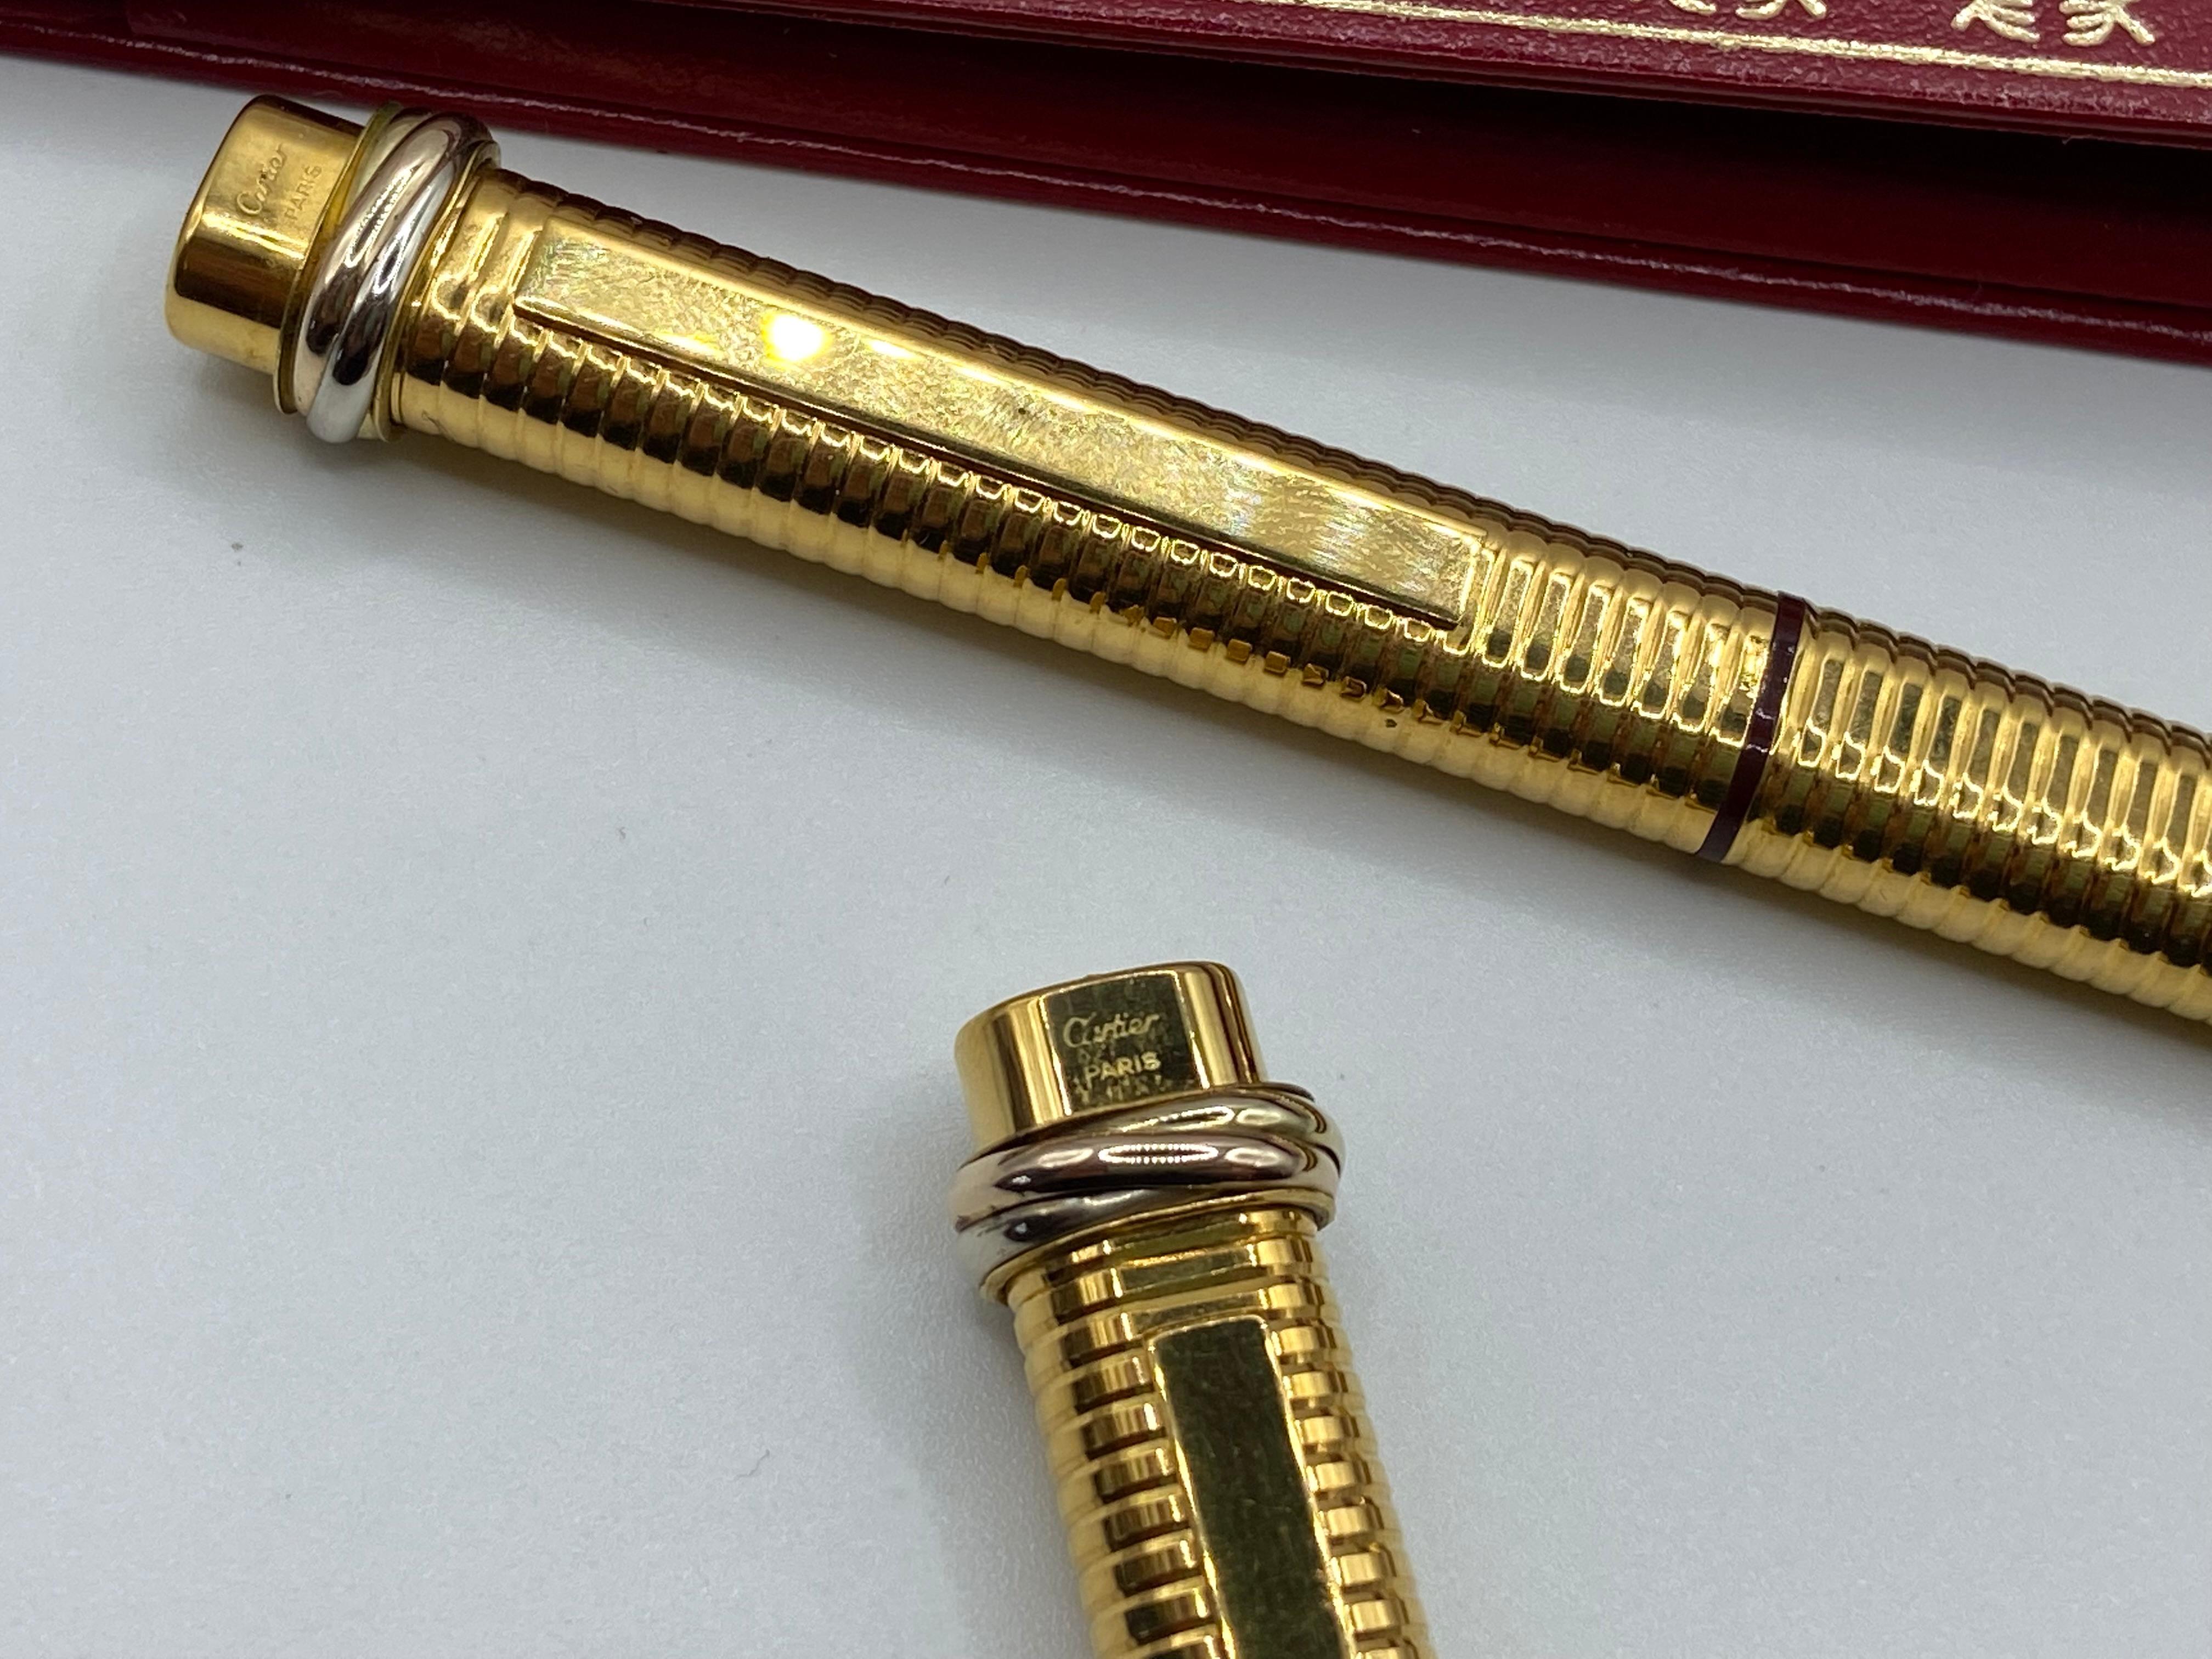 Two Pens, a Fountain Pen and a Roller, Santos by Must de Cartier, 18 Kt Gold Plated 7